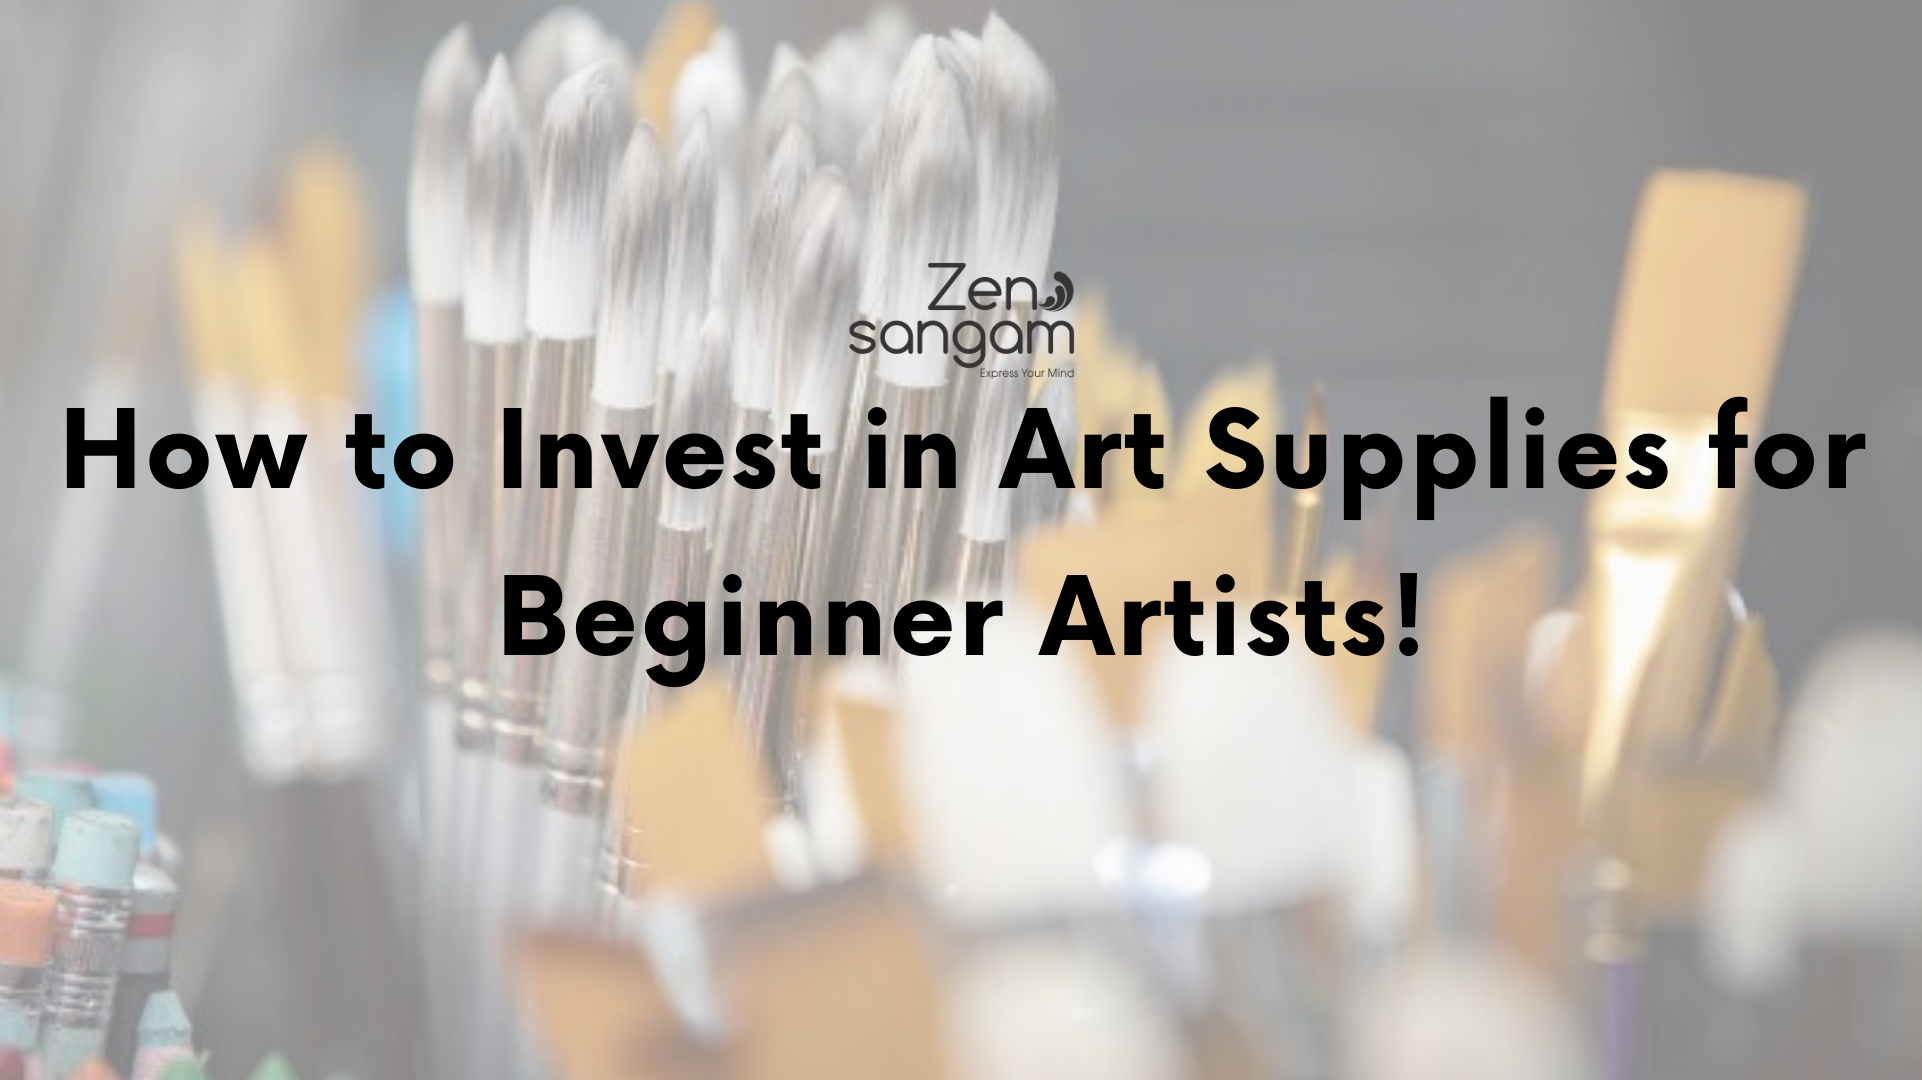 How to Invest in Art Supplies for Beginner Artists!